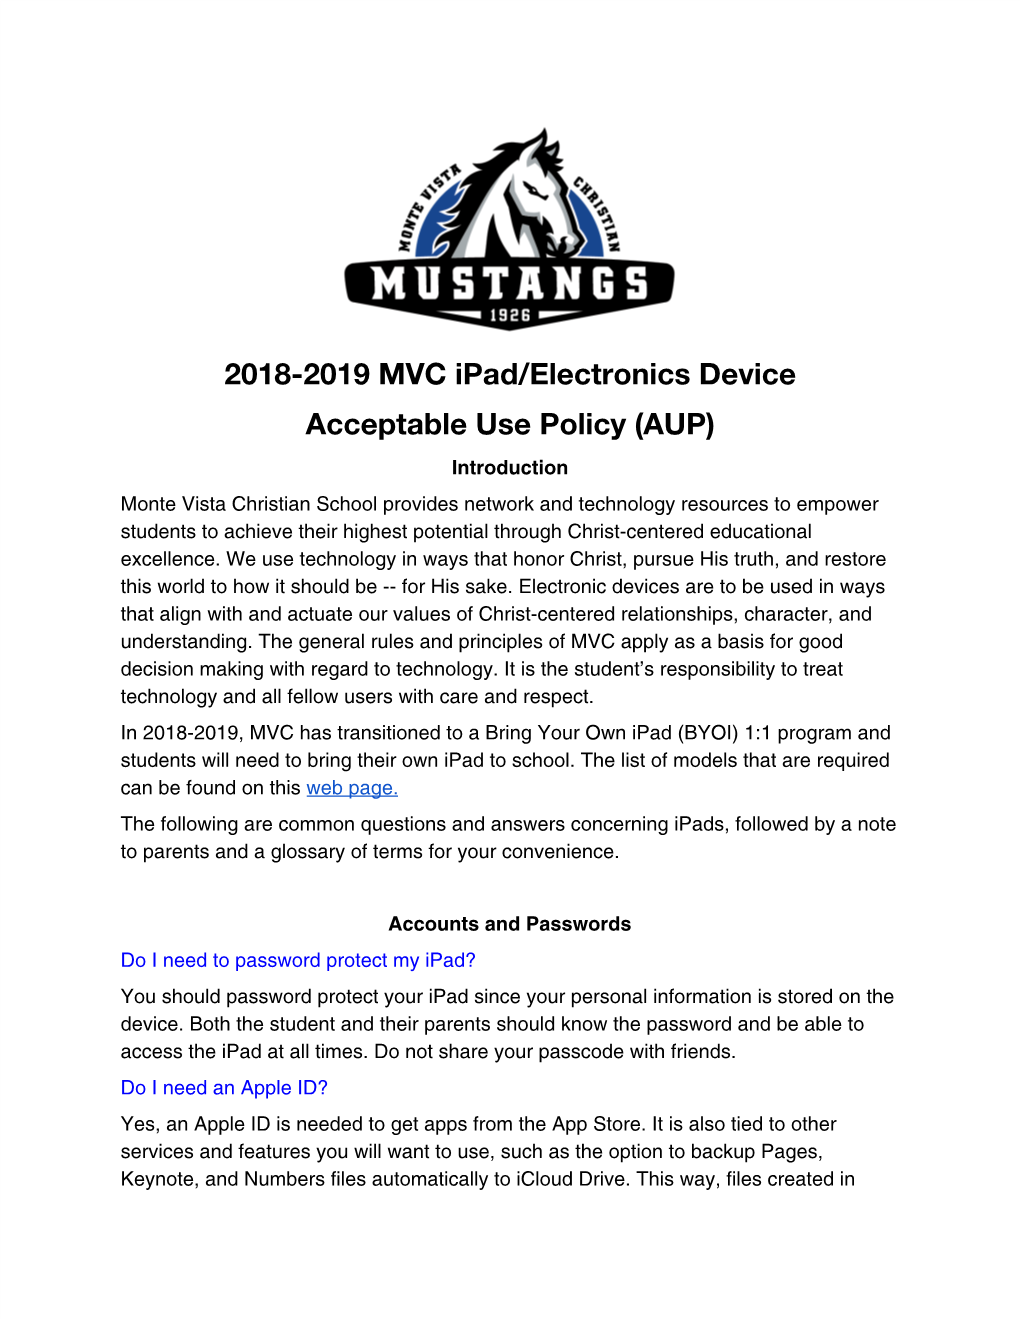 2018-2019 MVC Ipad/Electronics Device Acceptable Use Policy (AUP)